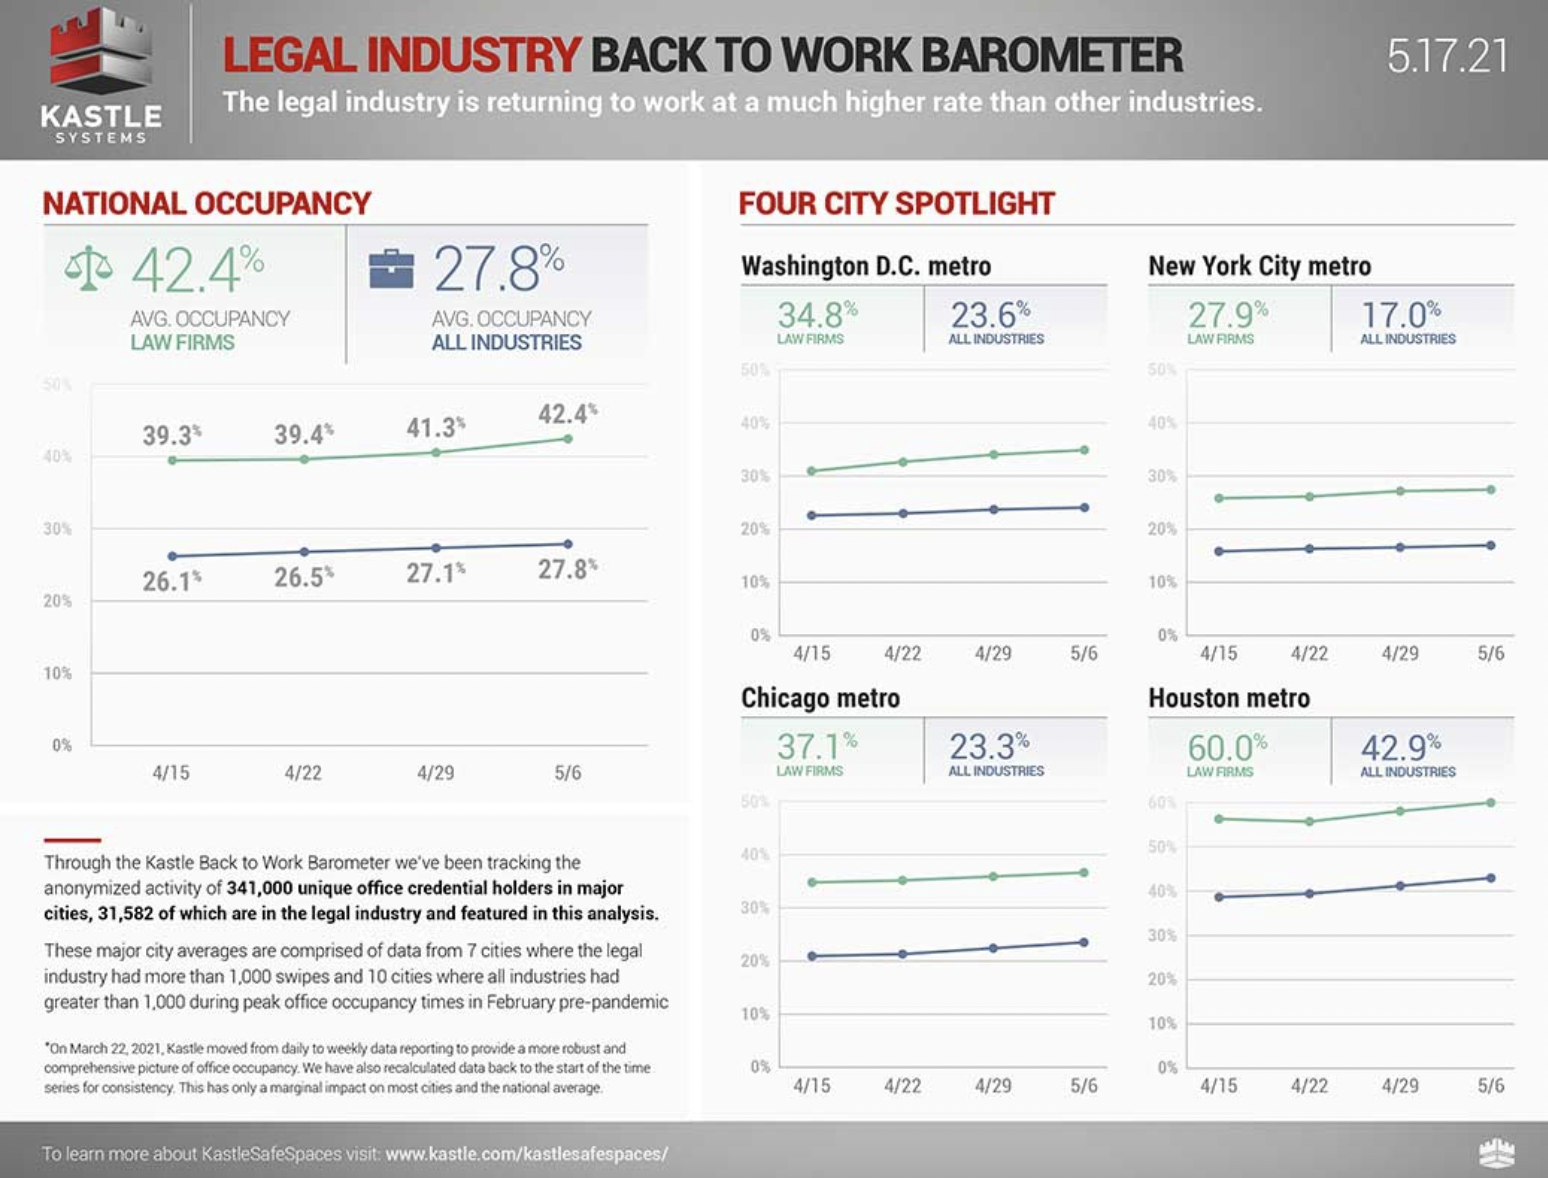 Chart by Kastle Systems showing that the legal industry is returning to work faster than other industry's commercial offices in 2021